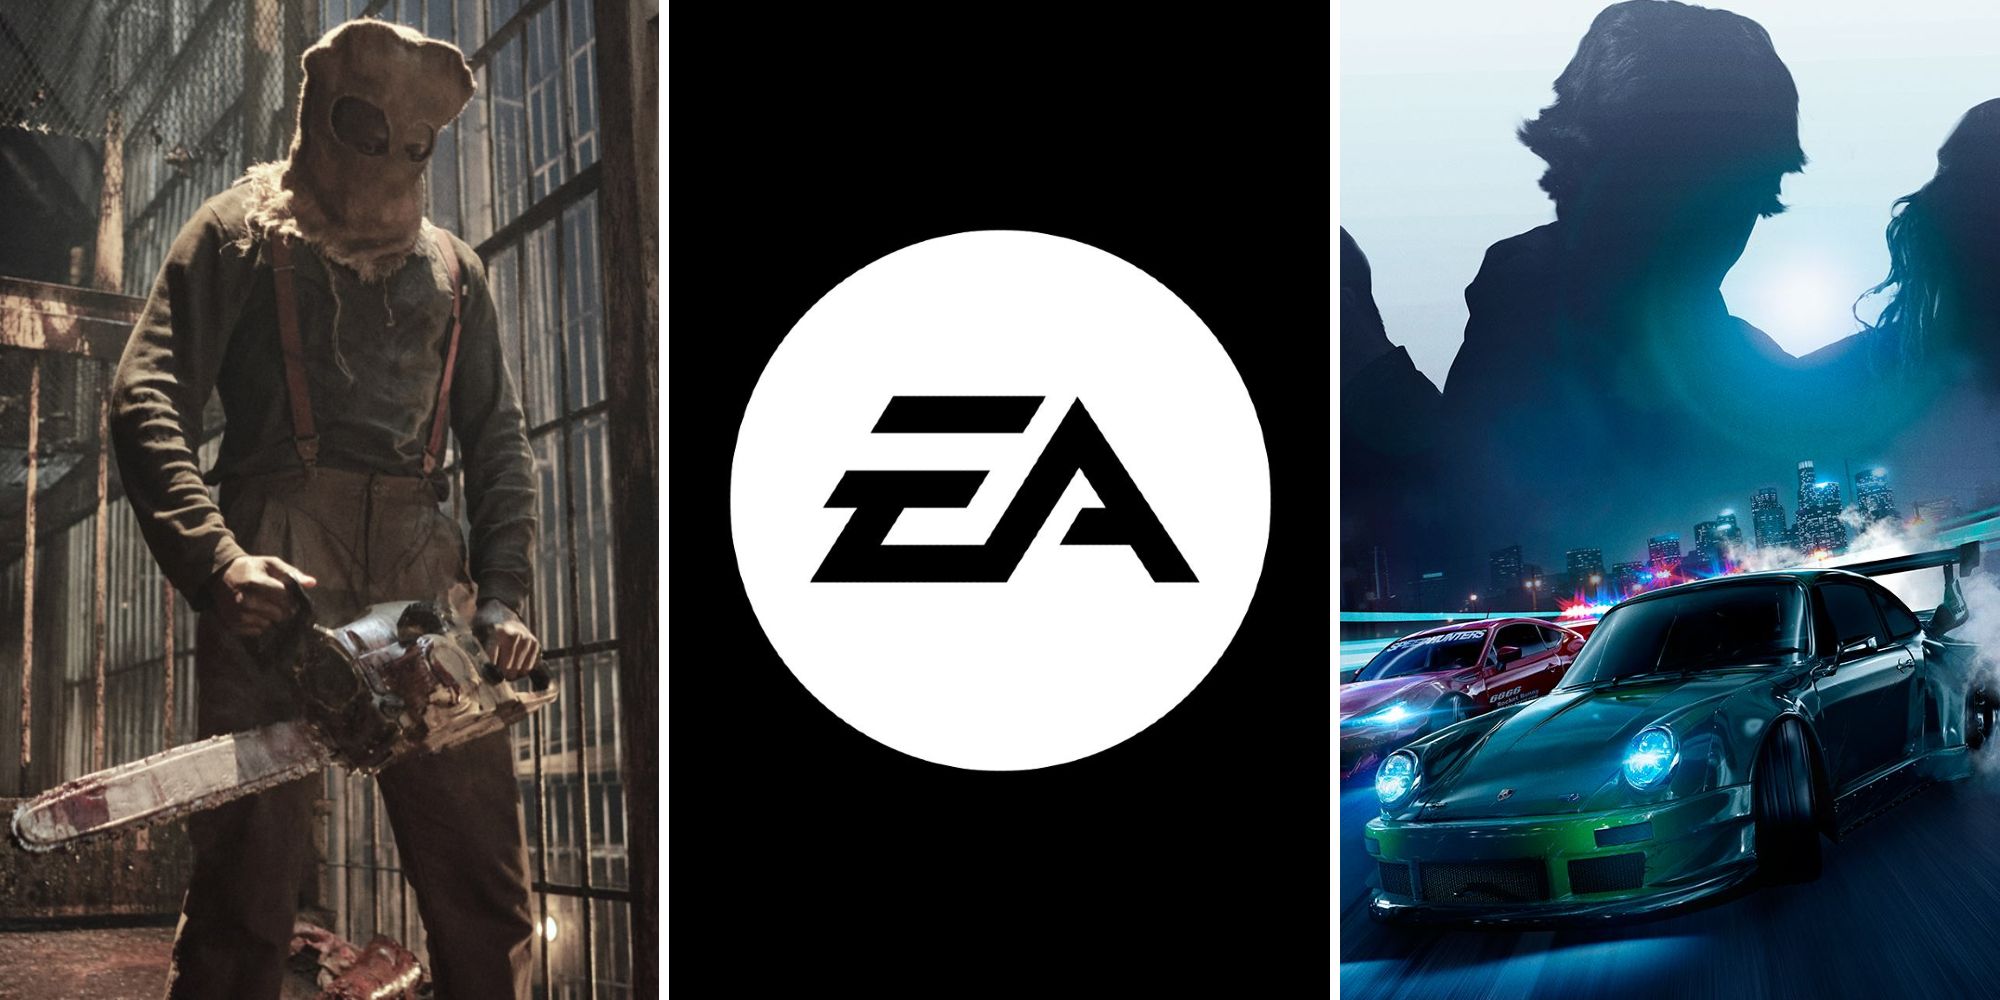 Chainsaw Man from Resident Evil, EA logo, and cars from Need for Speed.